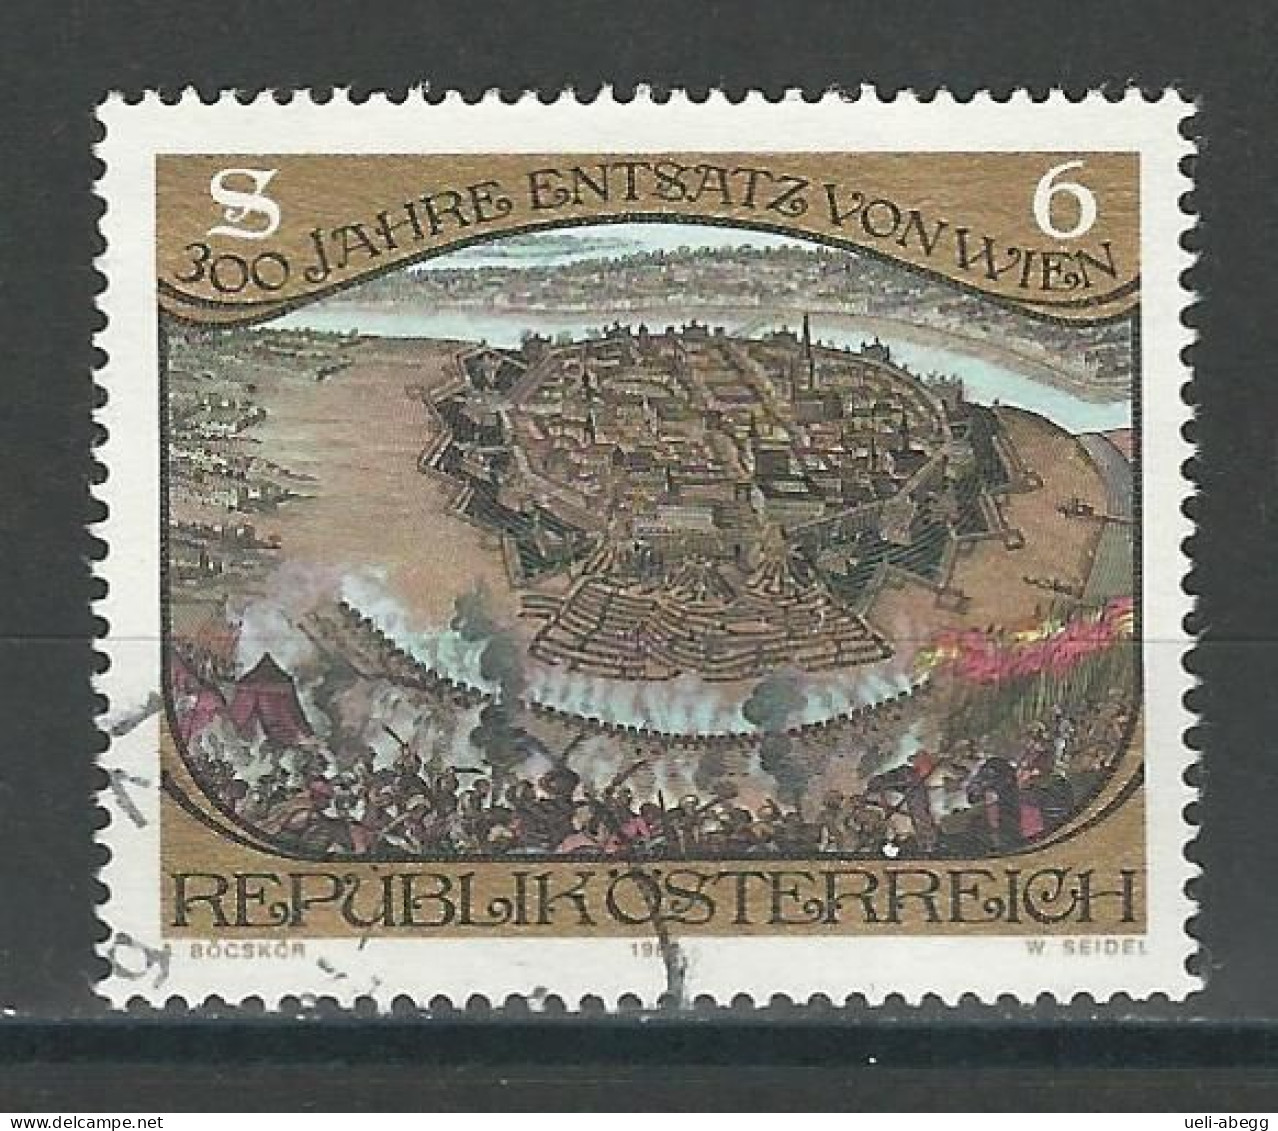 Österreich Mi 1750 O - Used Stamps